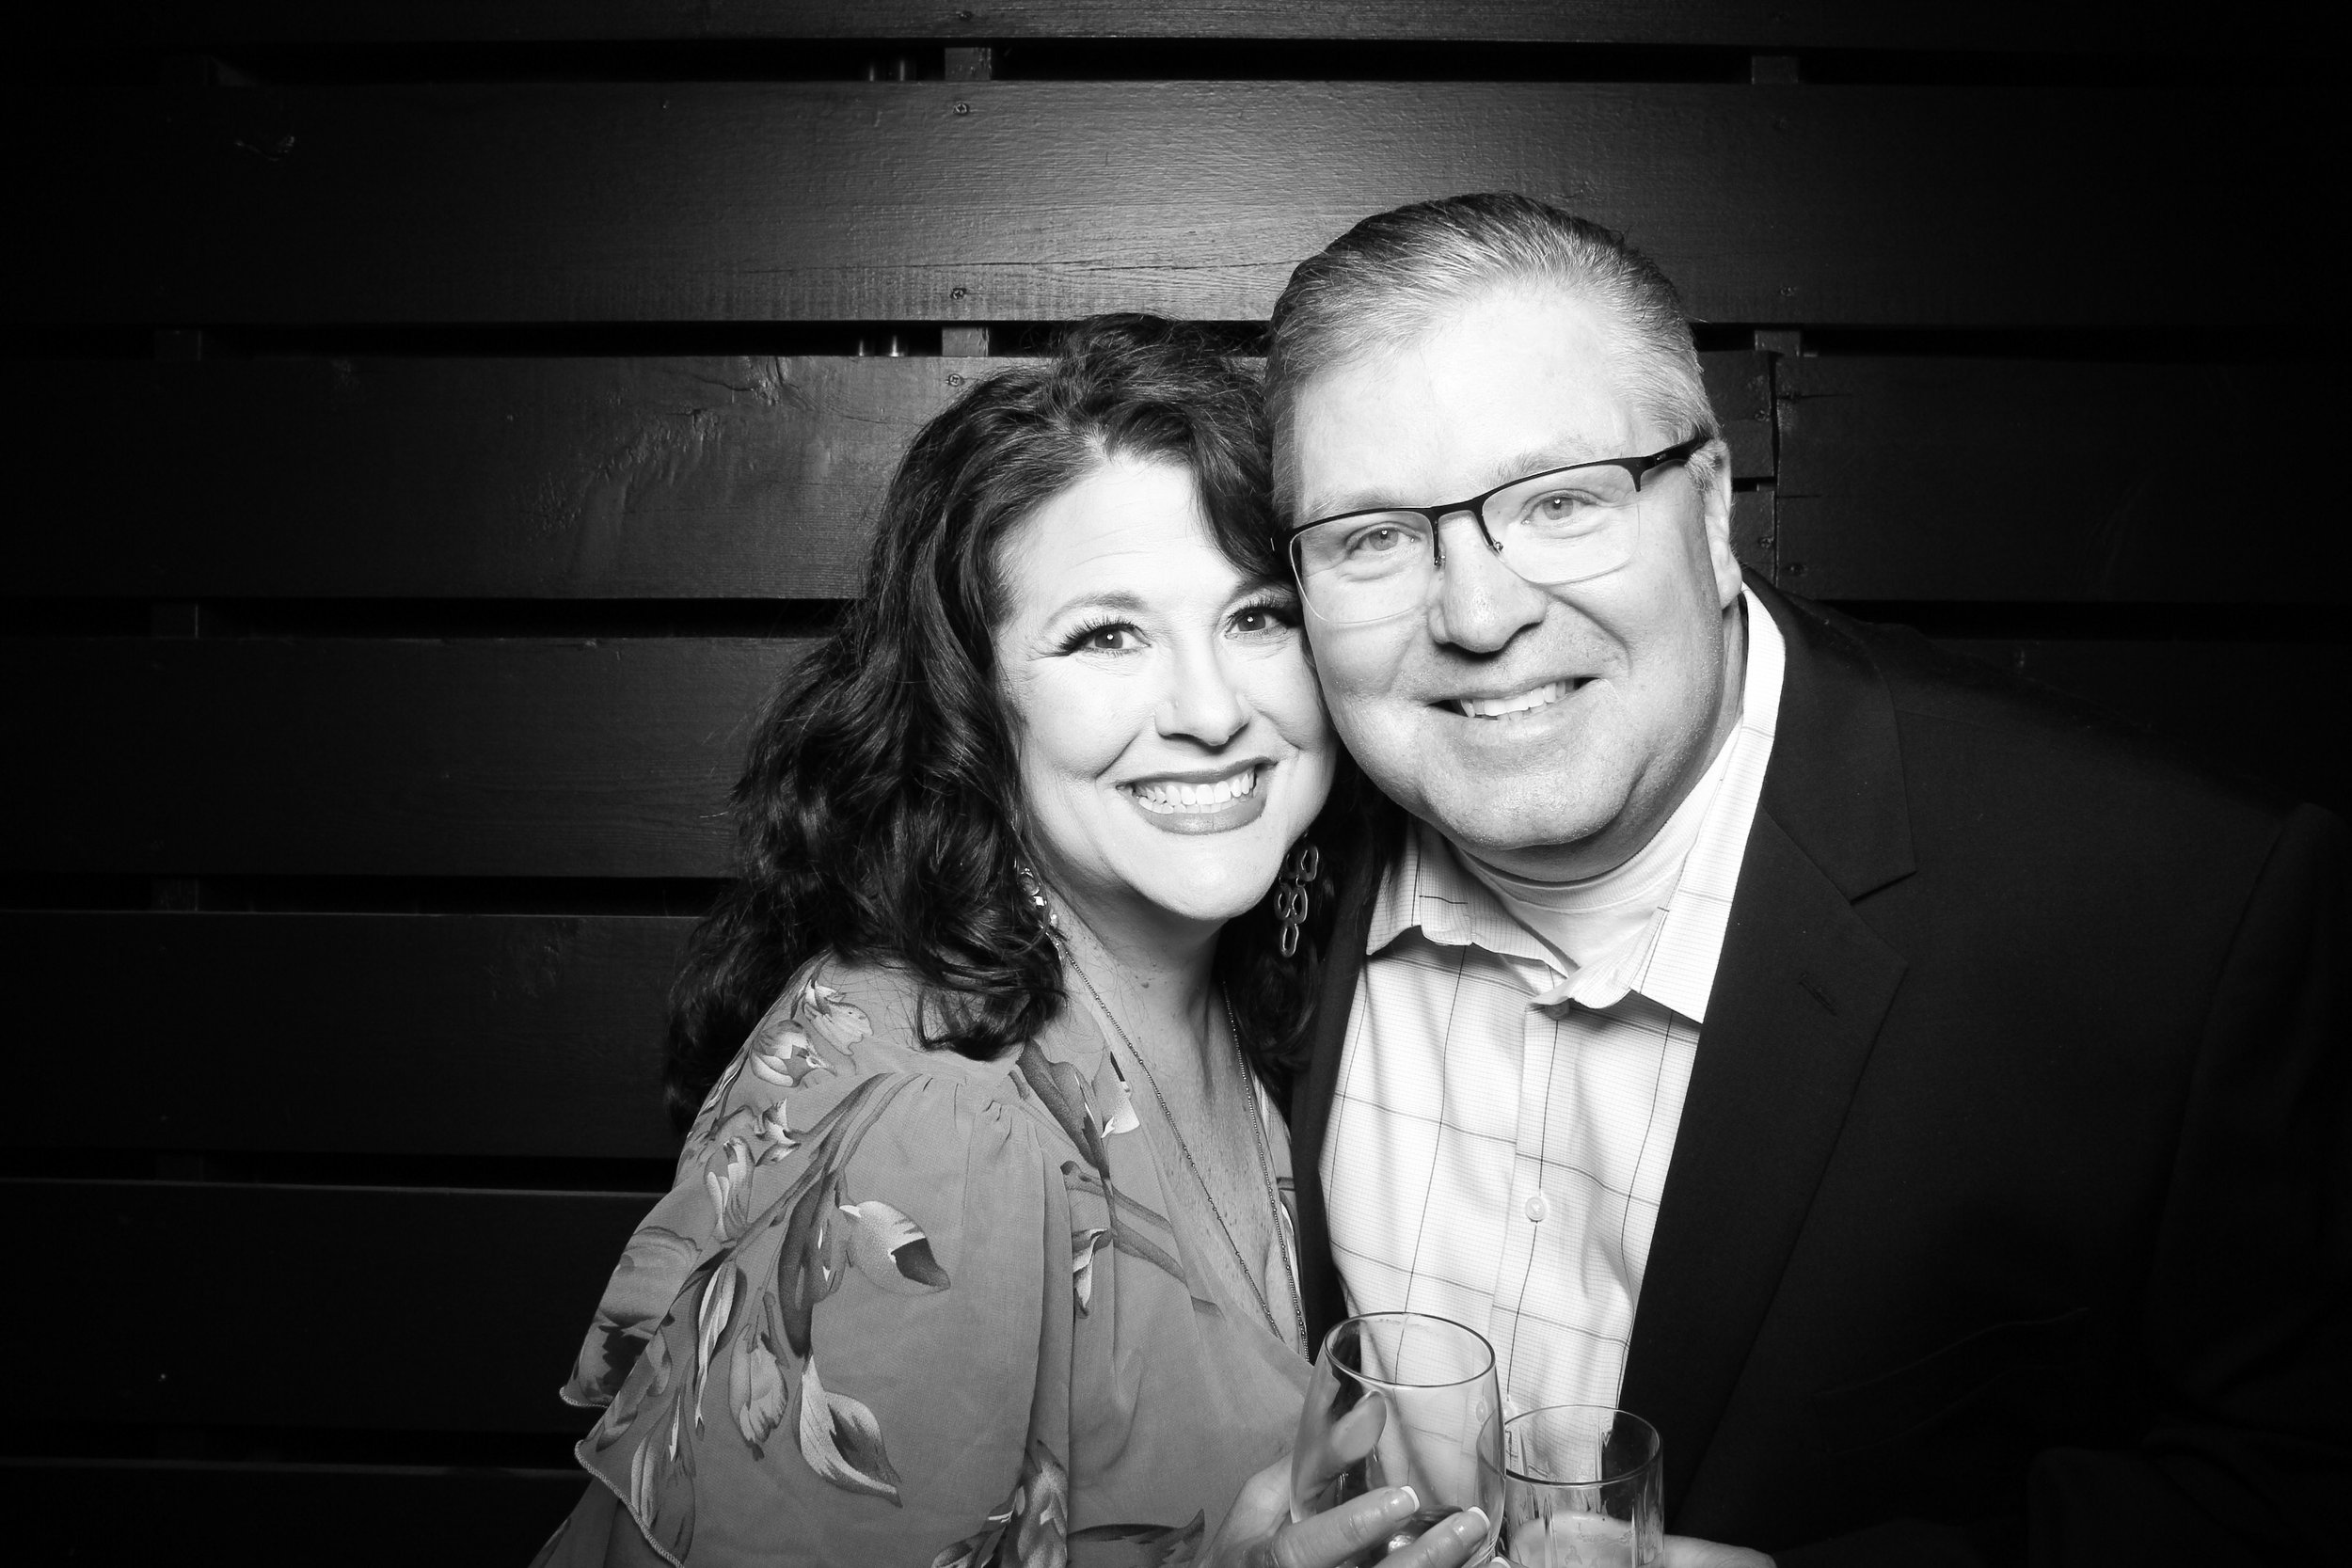 Fotio_Photo_Booth_Chicago_Winery_Clark_Street_Party_Family_Fun_Terrace_Superfans_River_North_03.jpg